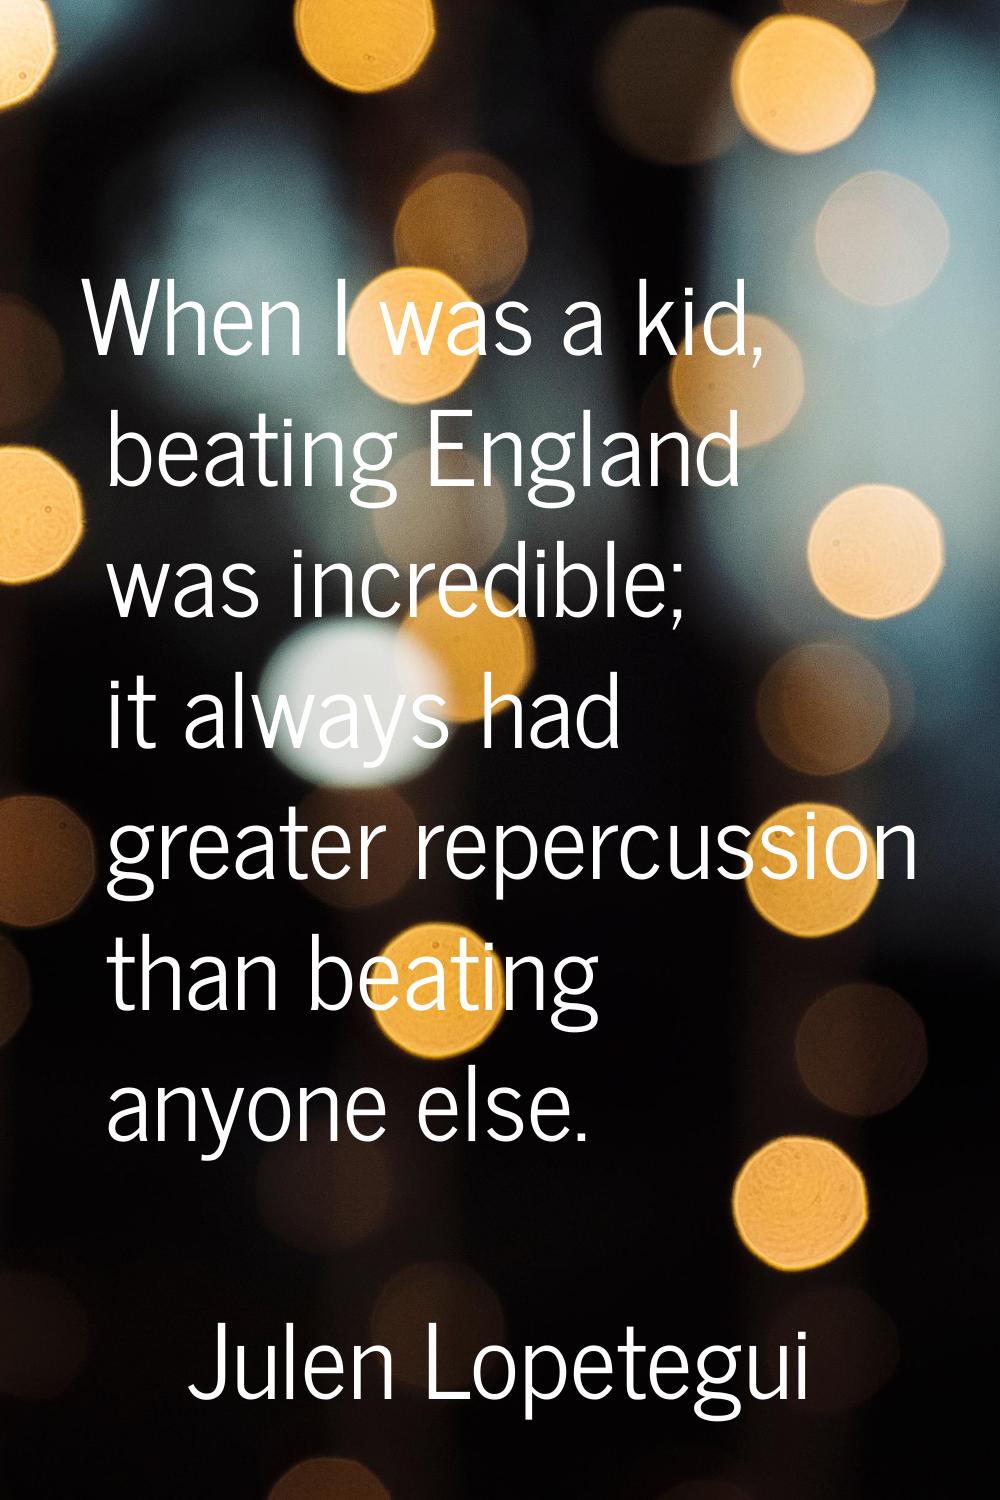 When I was a kid, beating England was incredible; it always had greater repercussion than beating a